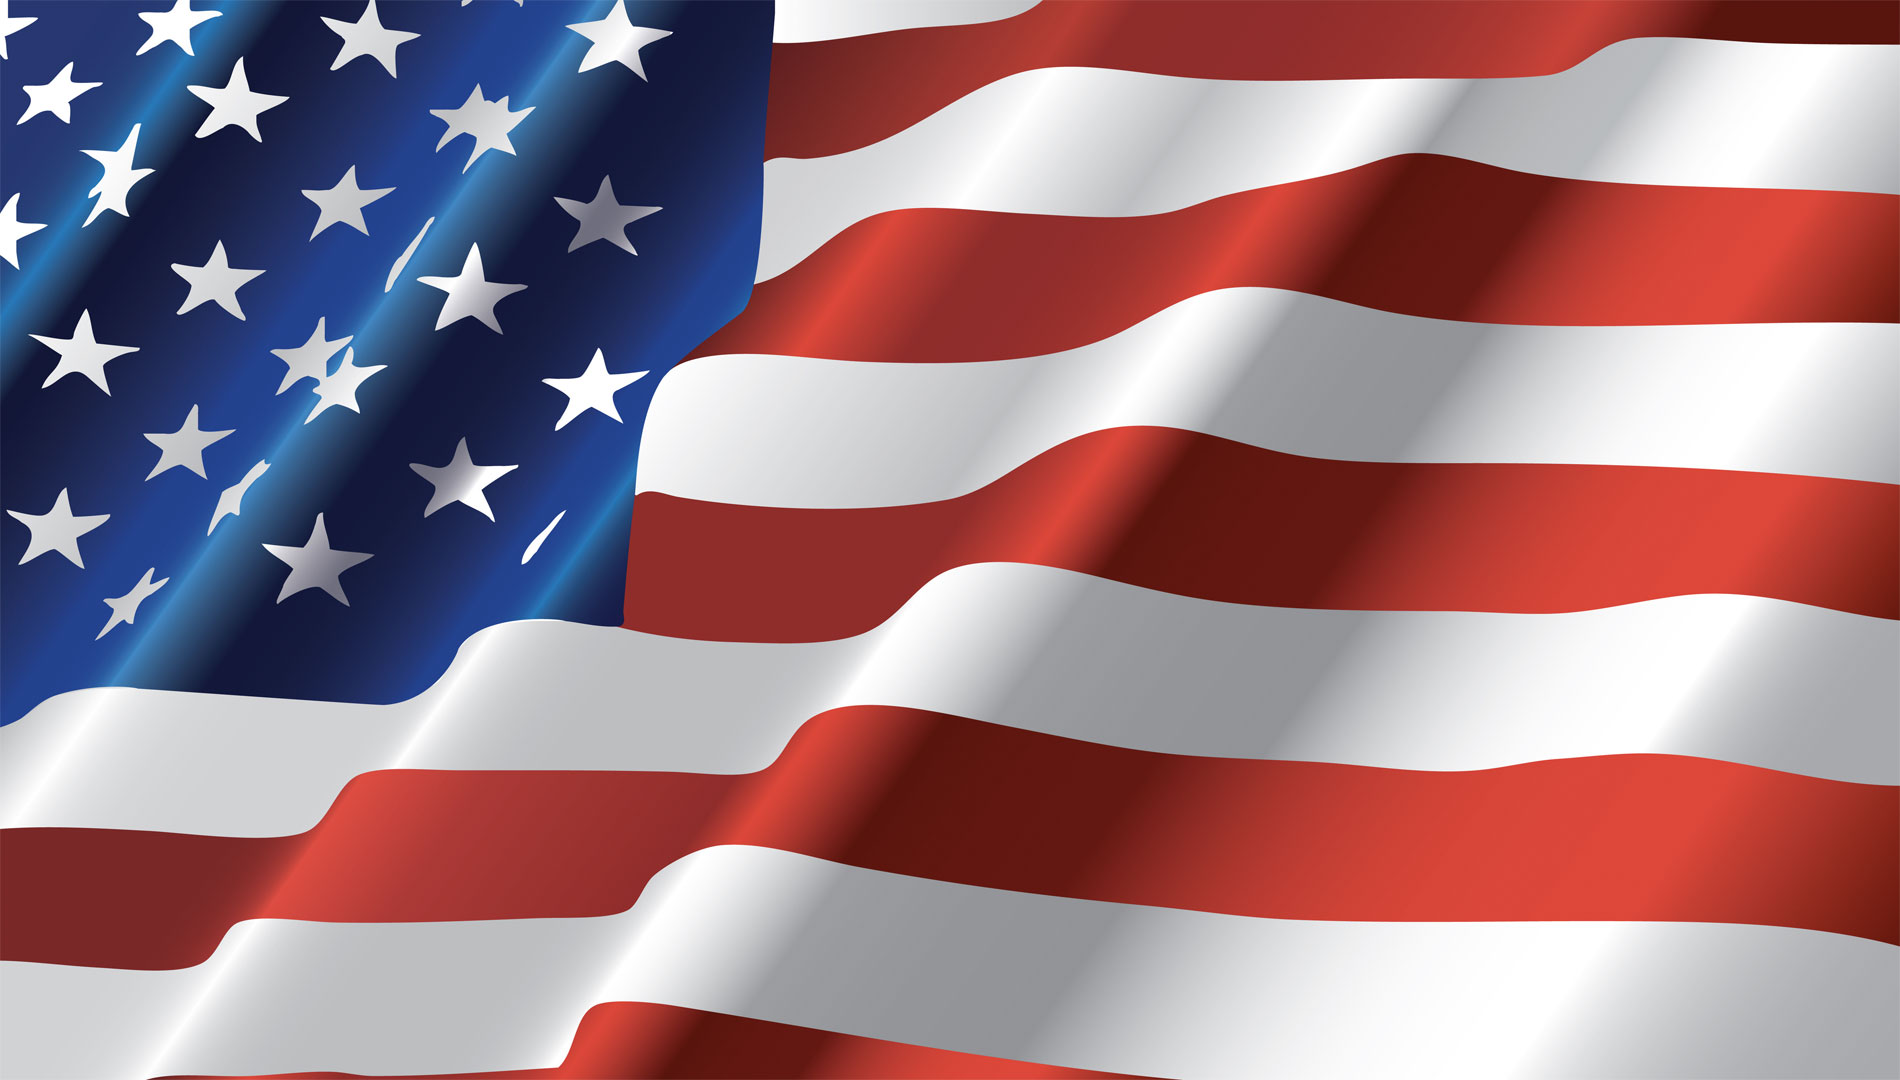 state, nation, wavy american flag background